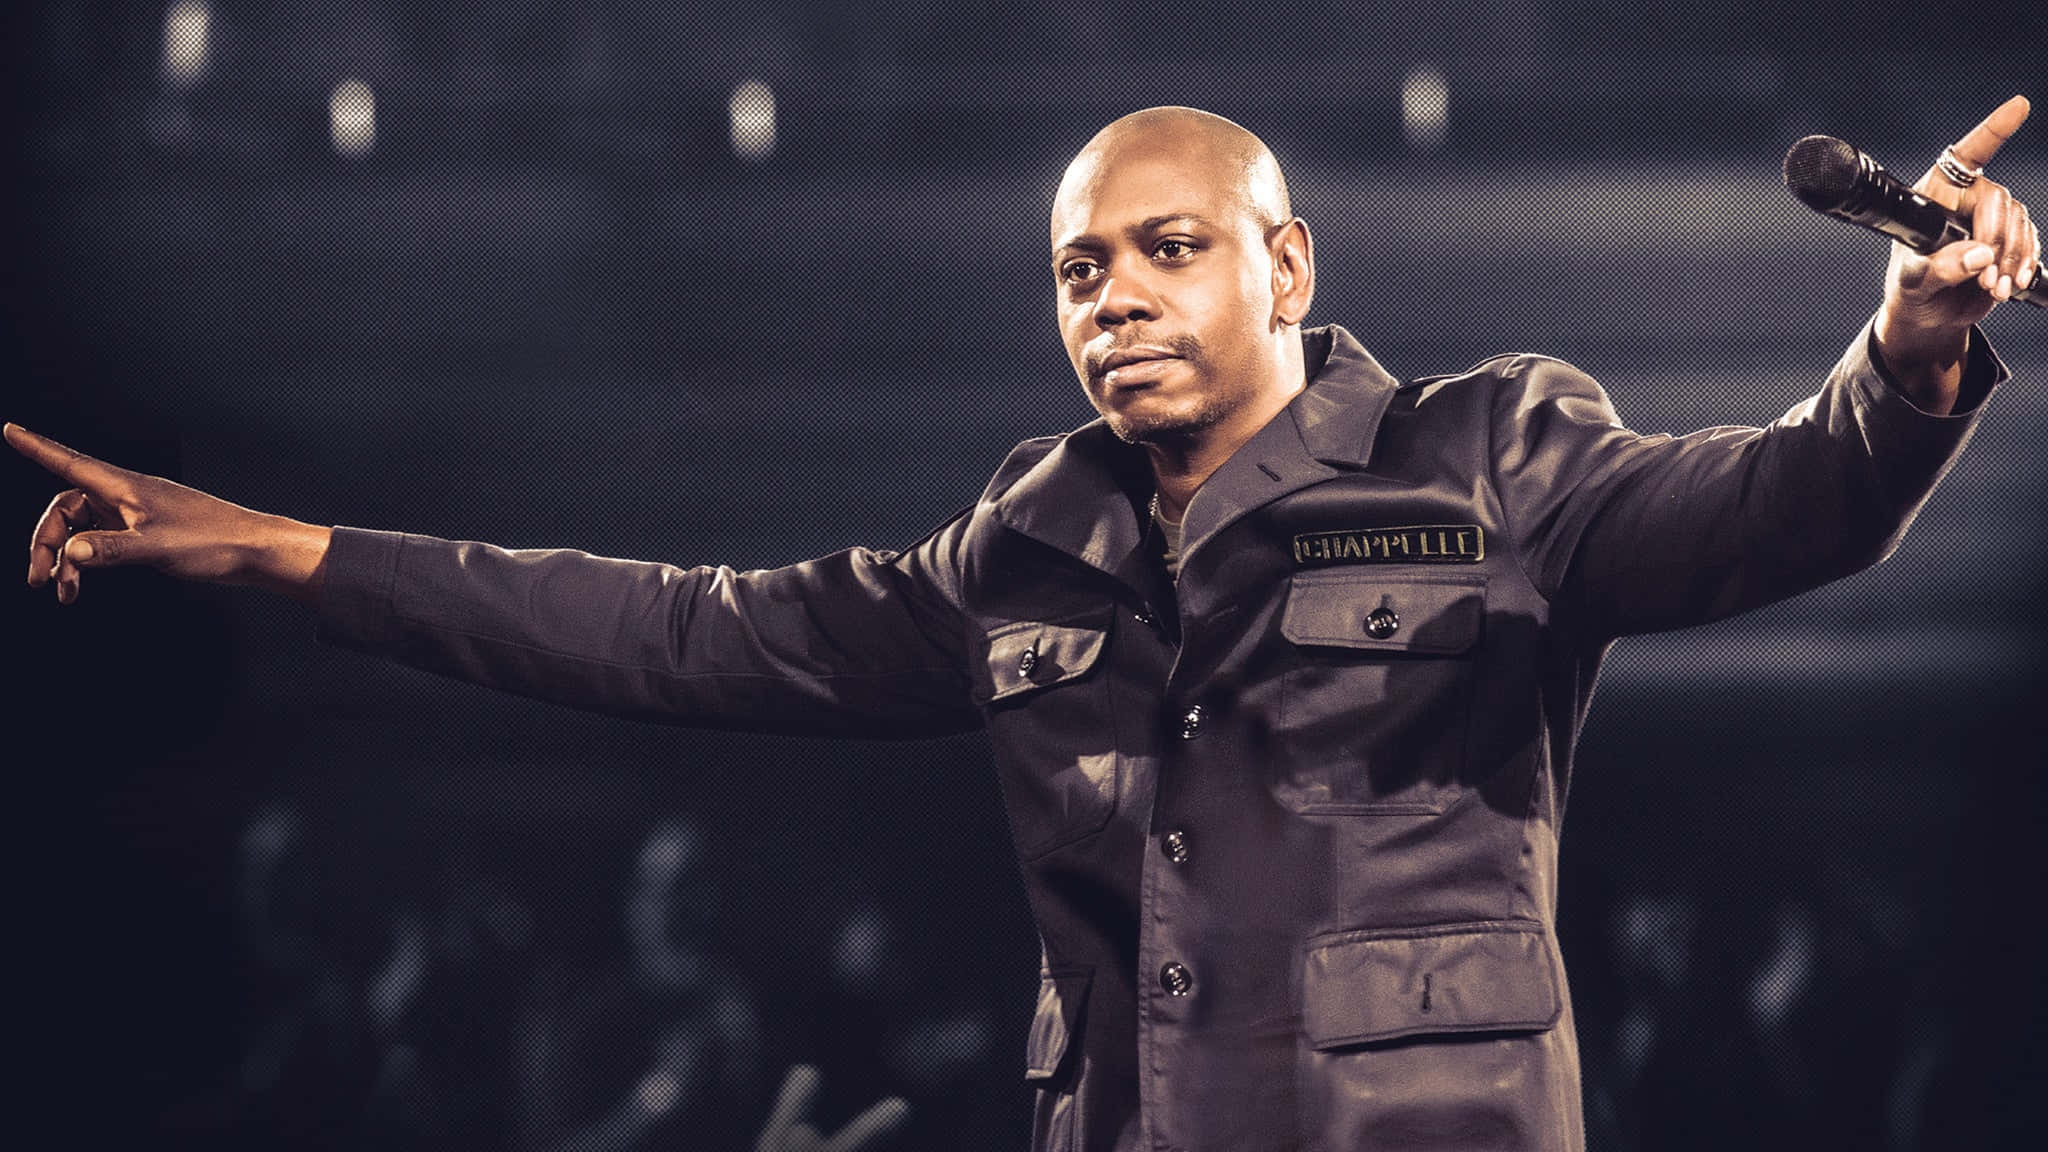 Comedy King Dave Chappelle Performing Live Wallpaper